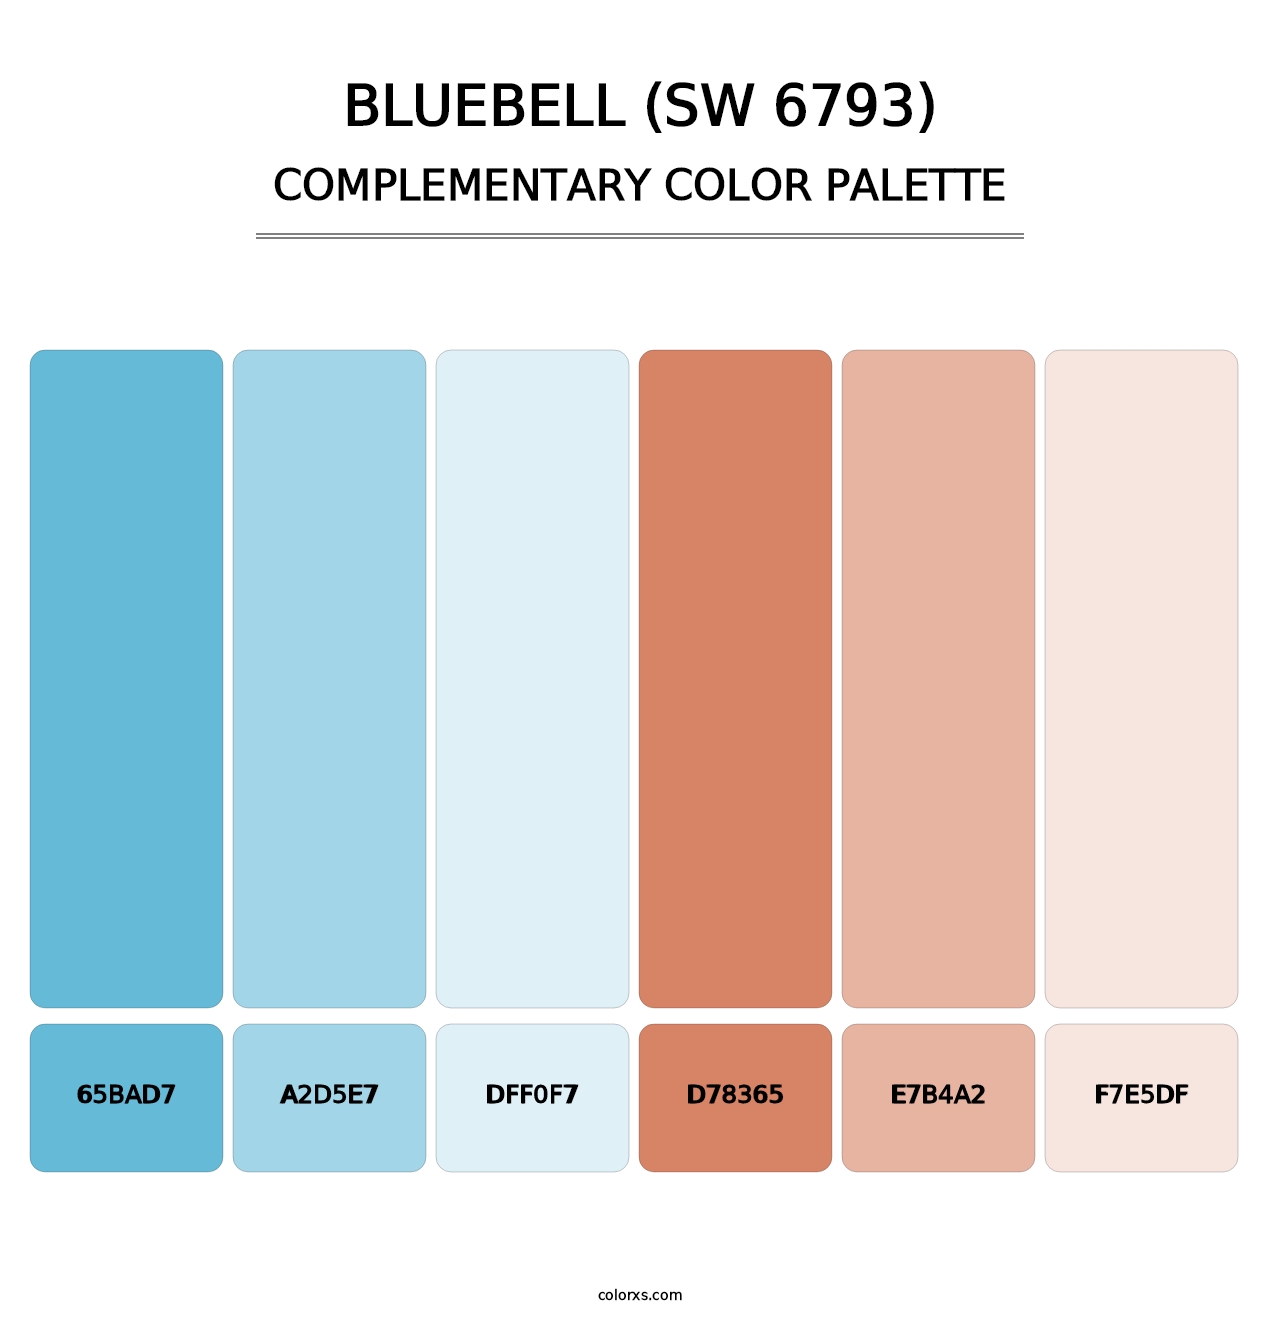 Bluebell (SW 6793) - Complementary Color Palette